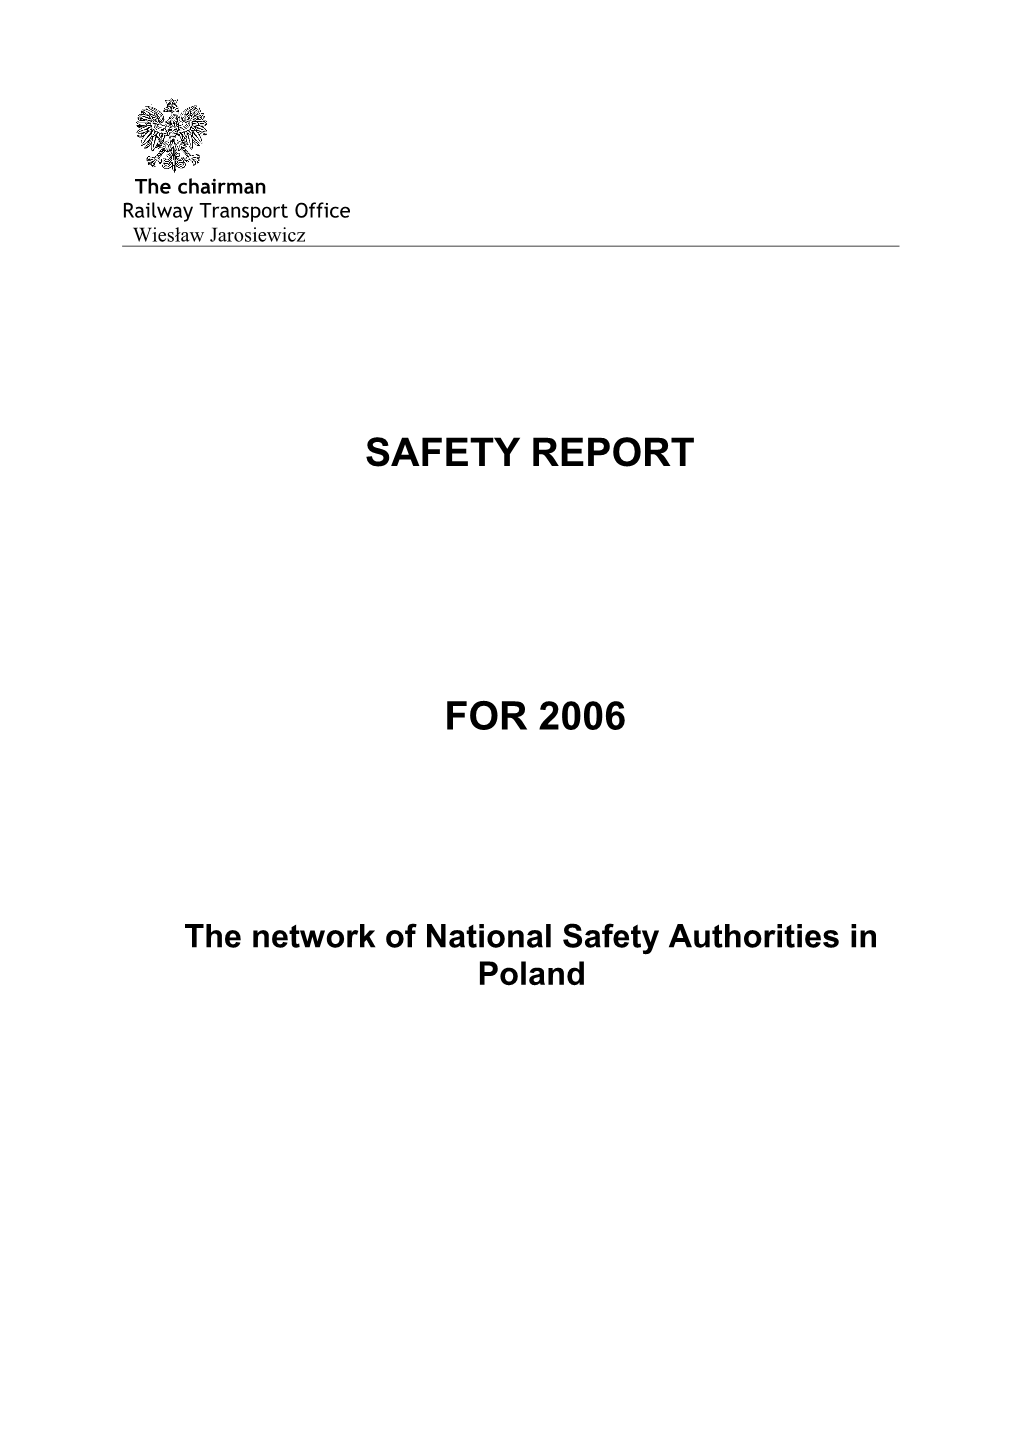 The Network of National Safety Authorities in Poland